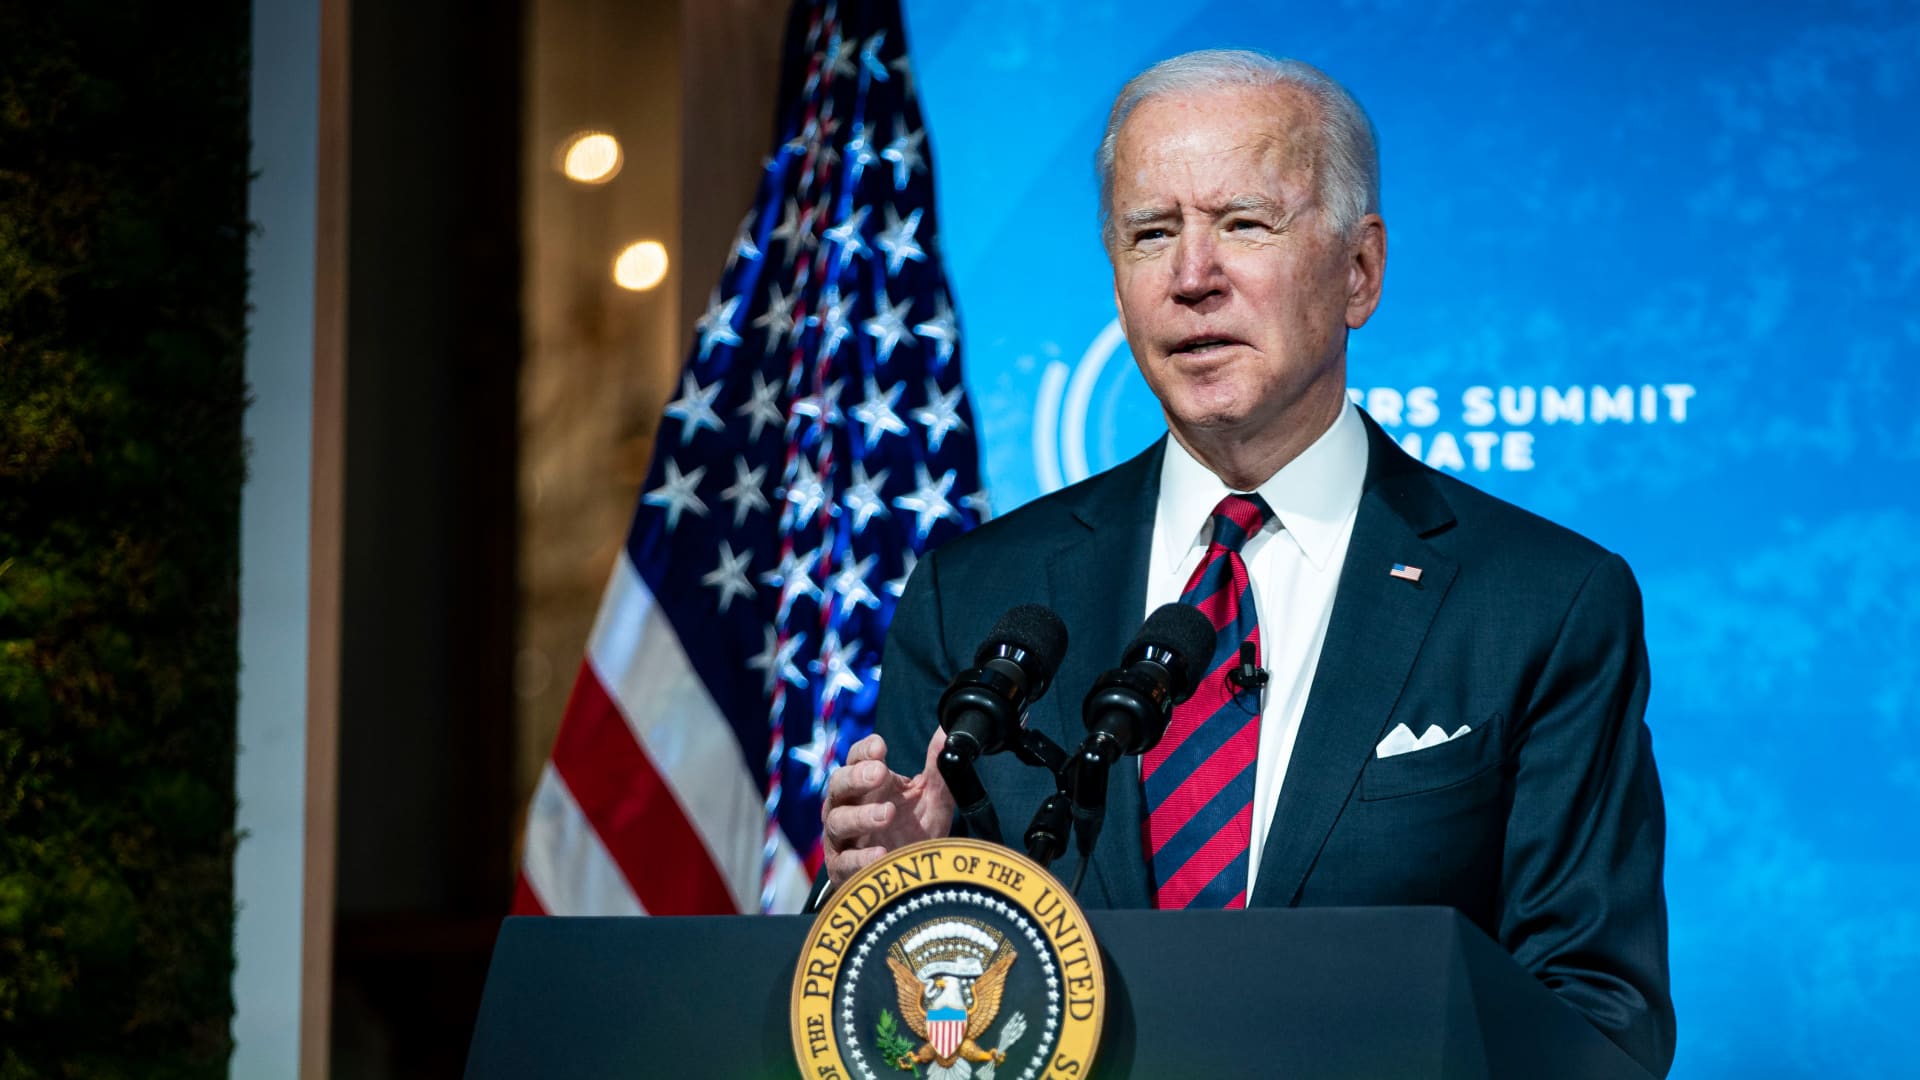 President Joe Biden delivers remarks during a virtual Leaders Summit on Climate with 40 world leaders at the East Room of the White House on April 22, 2021.